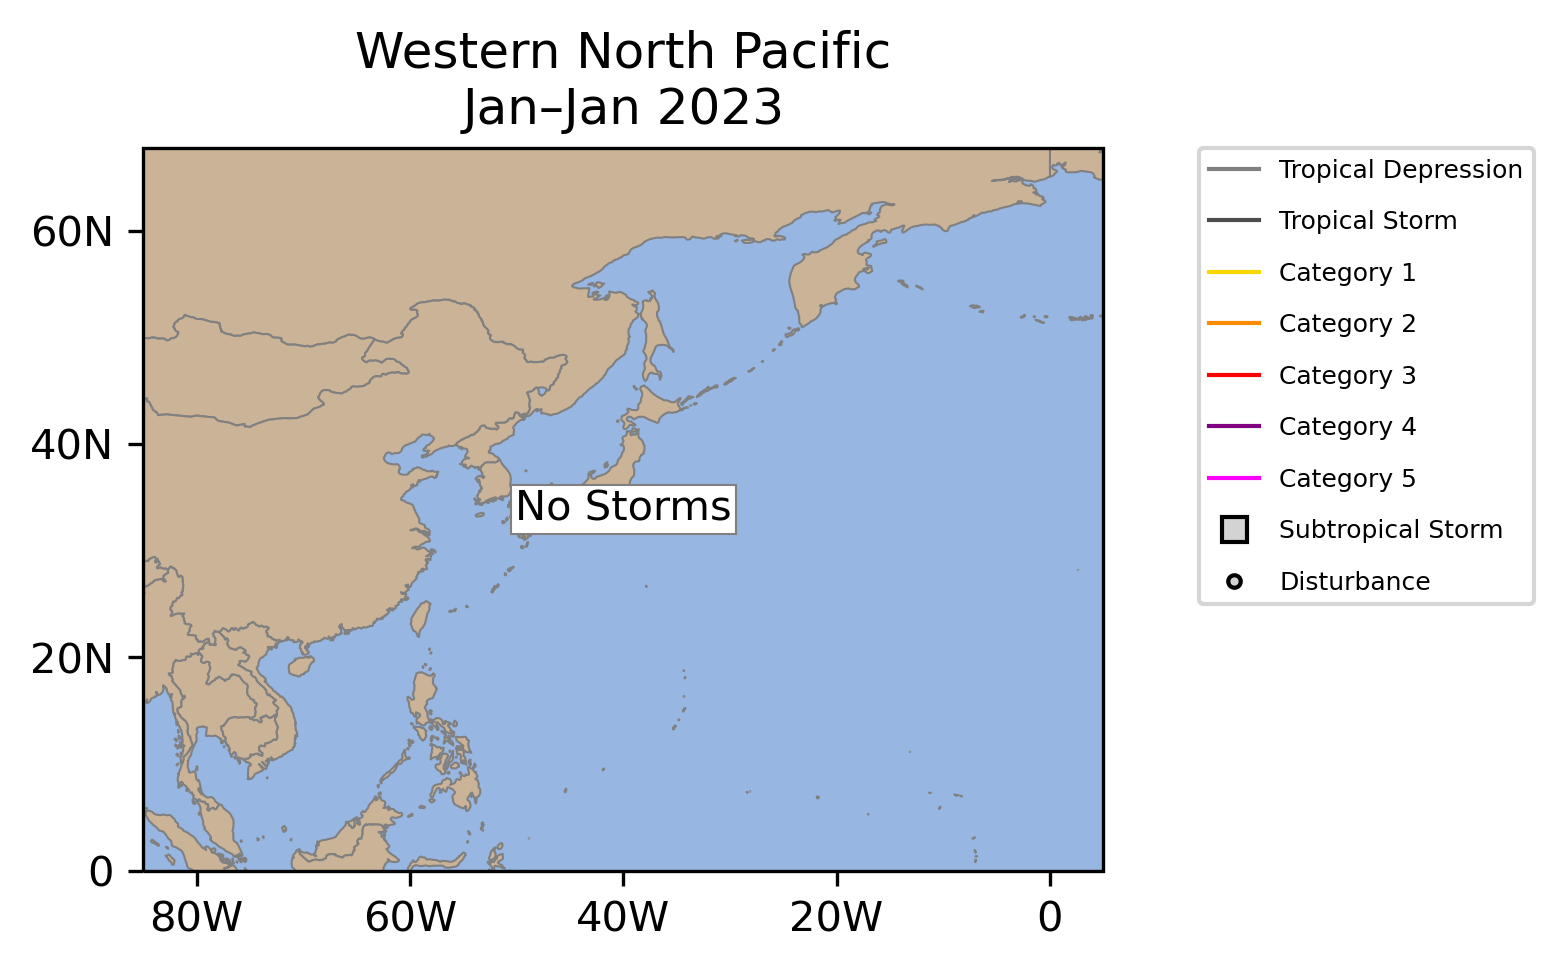 West Pacific Tropical Cyclone Storm Tracks January 2023